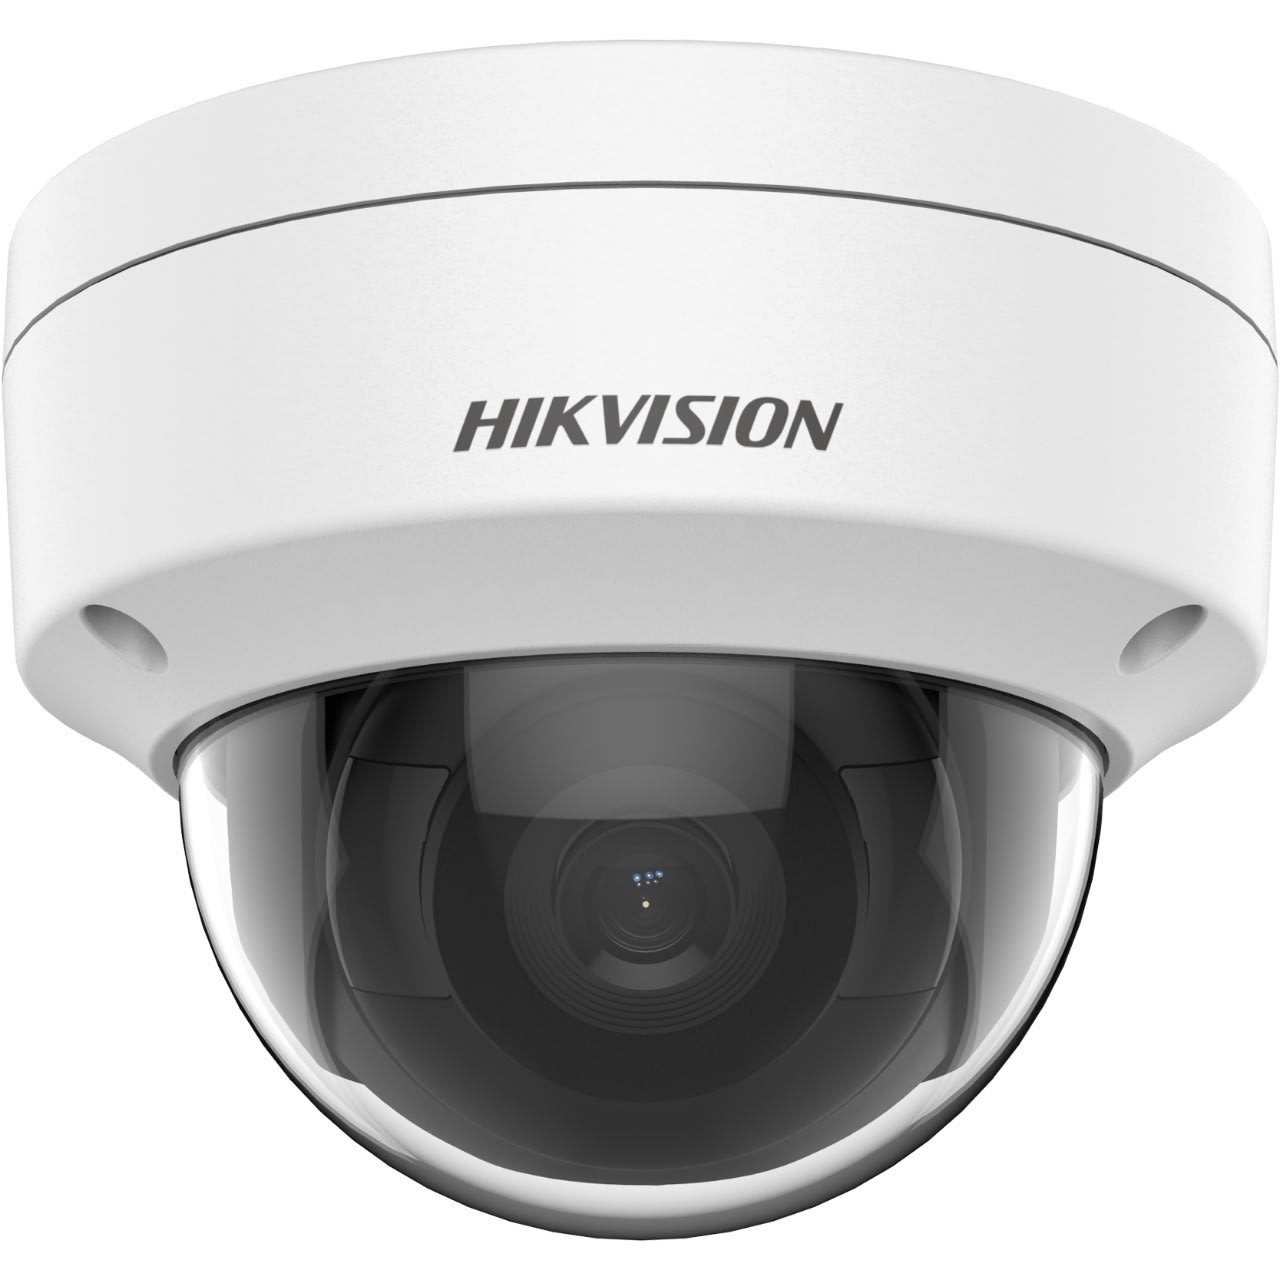 Hikvision - Camera IP dome,4MP,Focal2.8mm,120dB,IP67